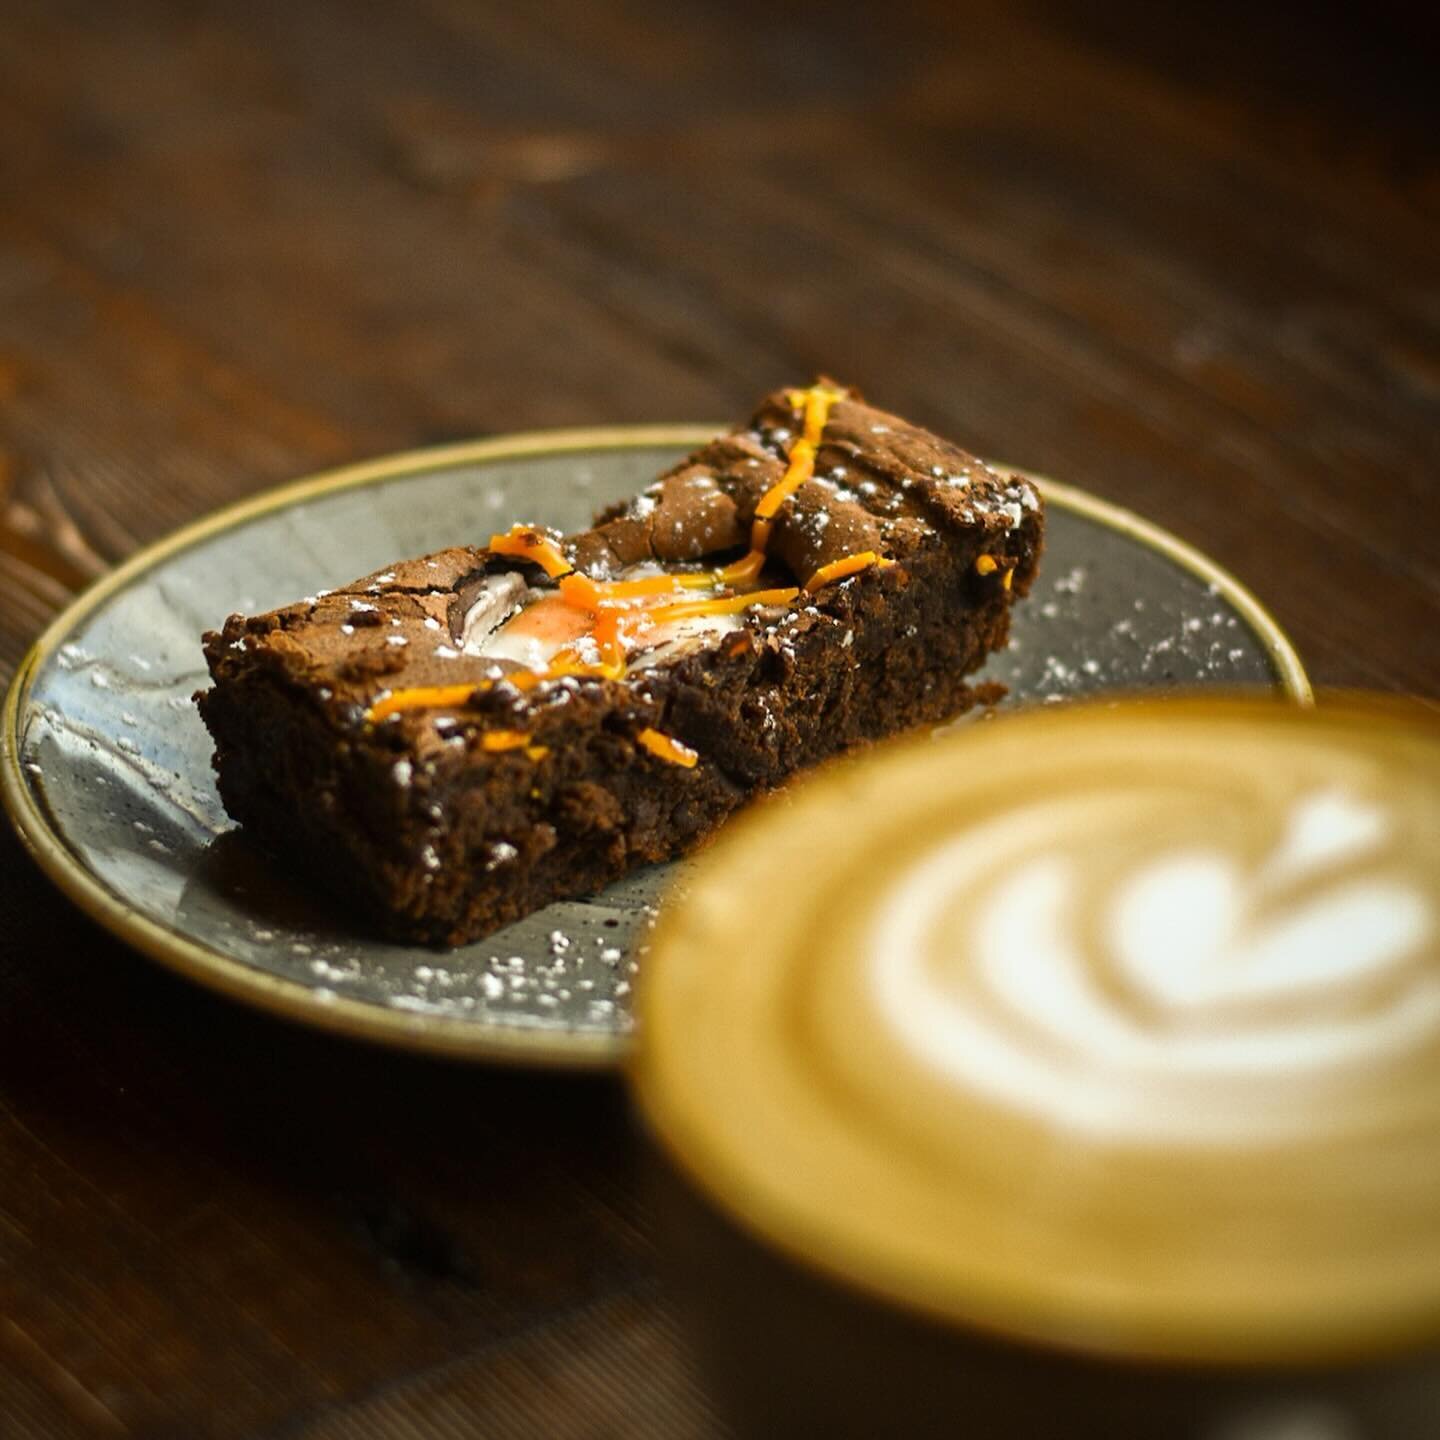 A coffee and a creme egg brownie to see out a busy wee Easter Saturday! ☕️

Big thanks to everyone who swung by today! Don&rsquo;t forget, we&rsquo;re open as usual the rest of the long weekend. Check out table availability over on our website.